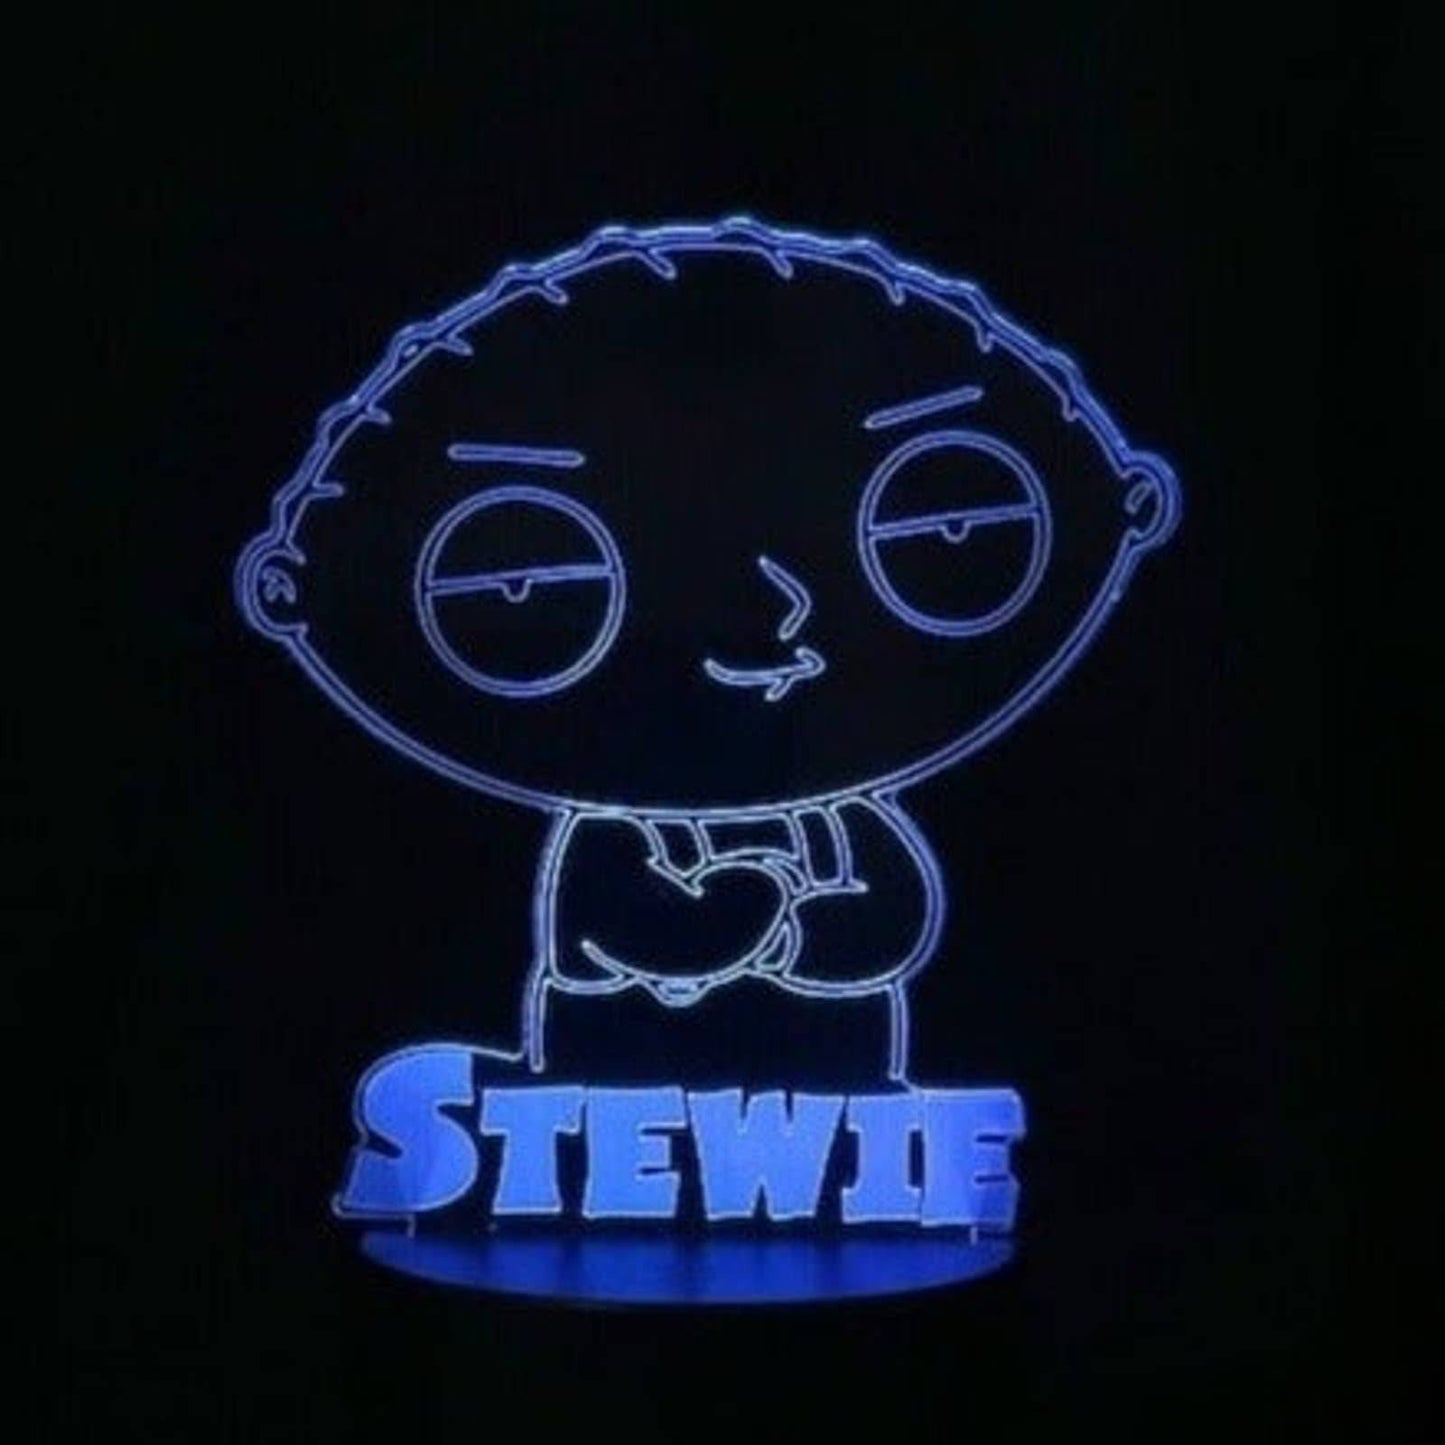 Stewie 3D LED Night-Light 7 Color Changing Lamp w/ Touch Switch